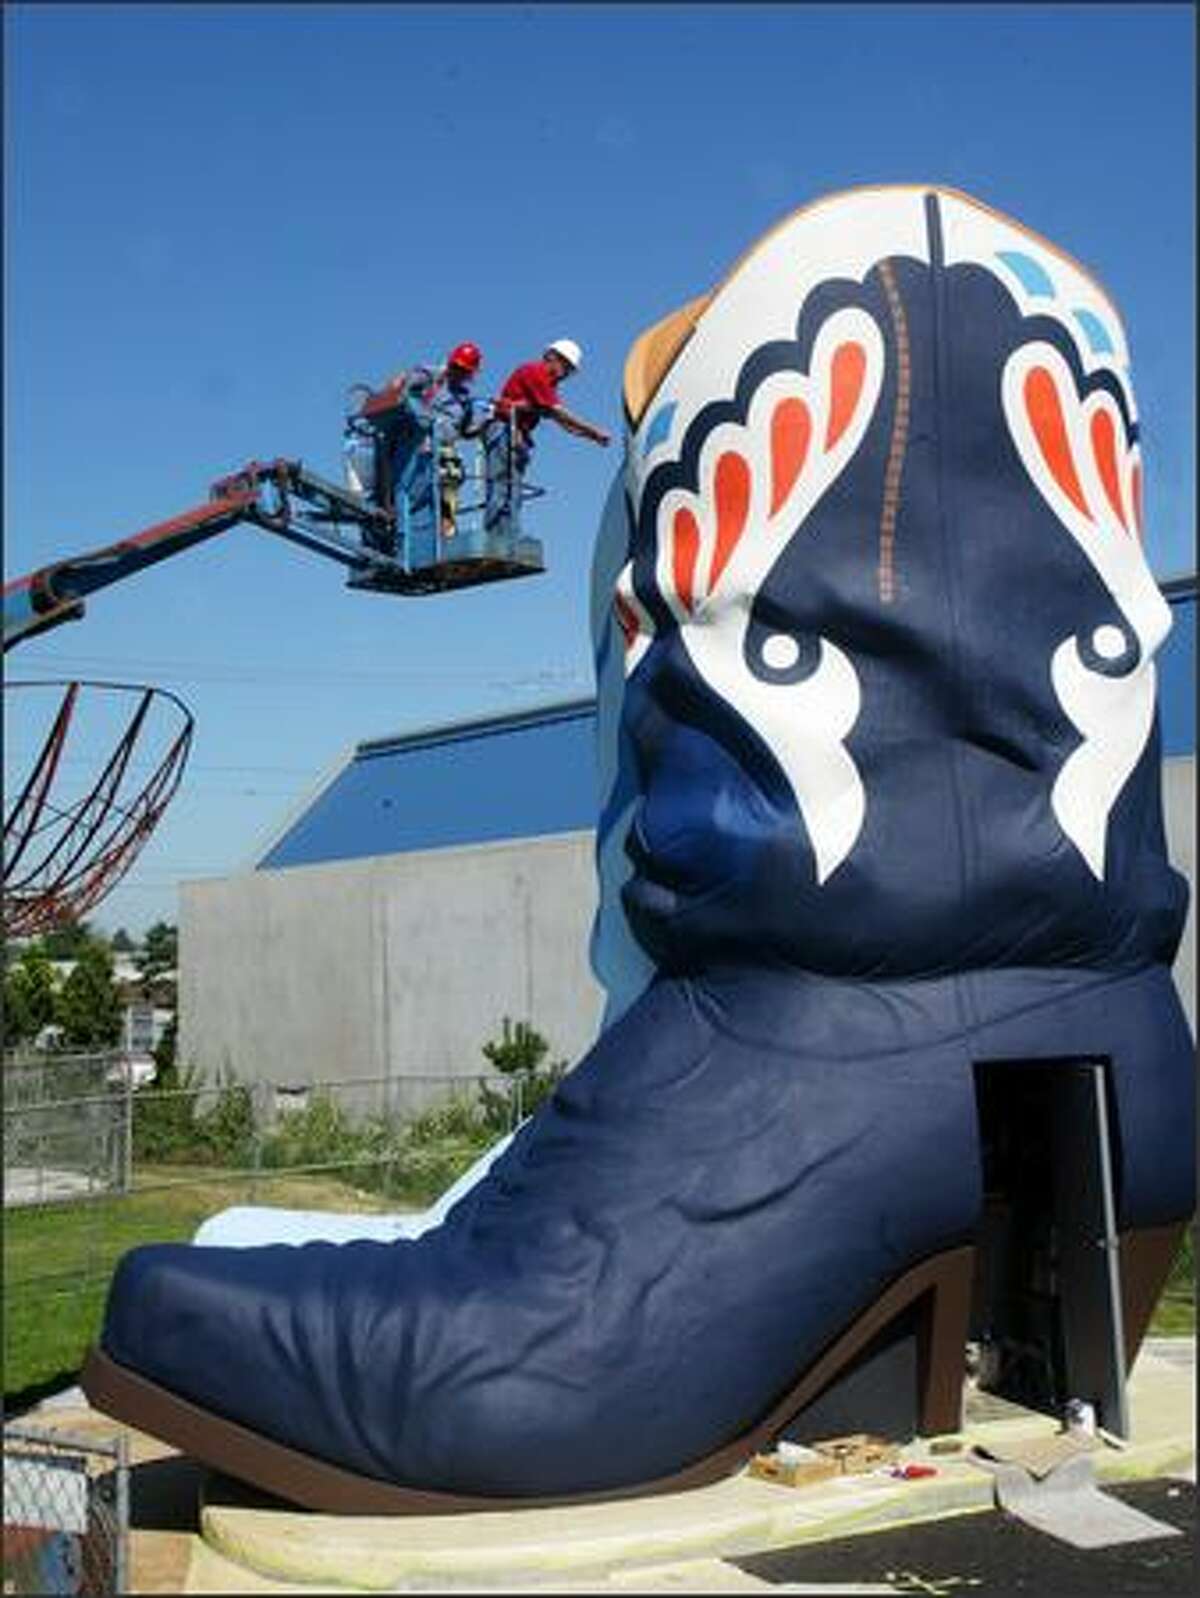 The Hat 'N Boots is repainted in its original colors.